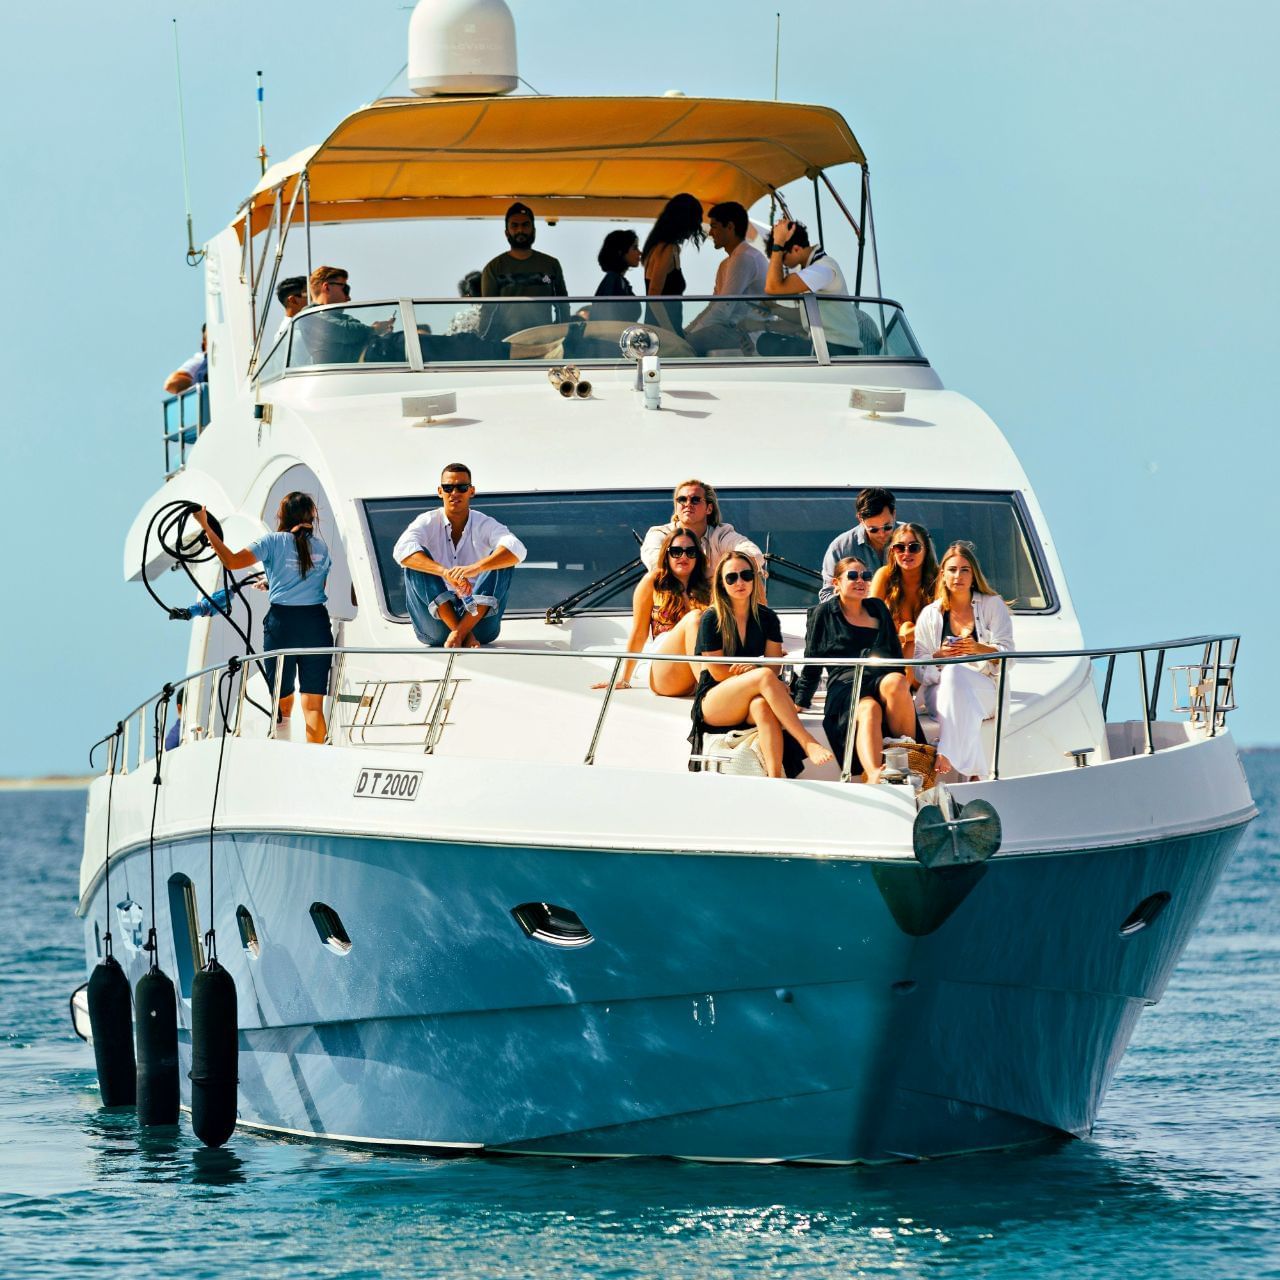 People experiencing & enjoying a cruise on the Yacht on a sunny day at Côte d'Azur Resort